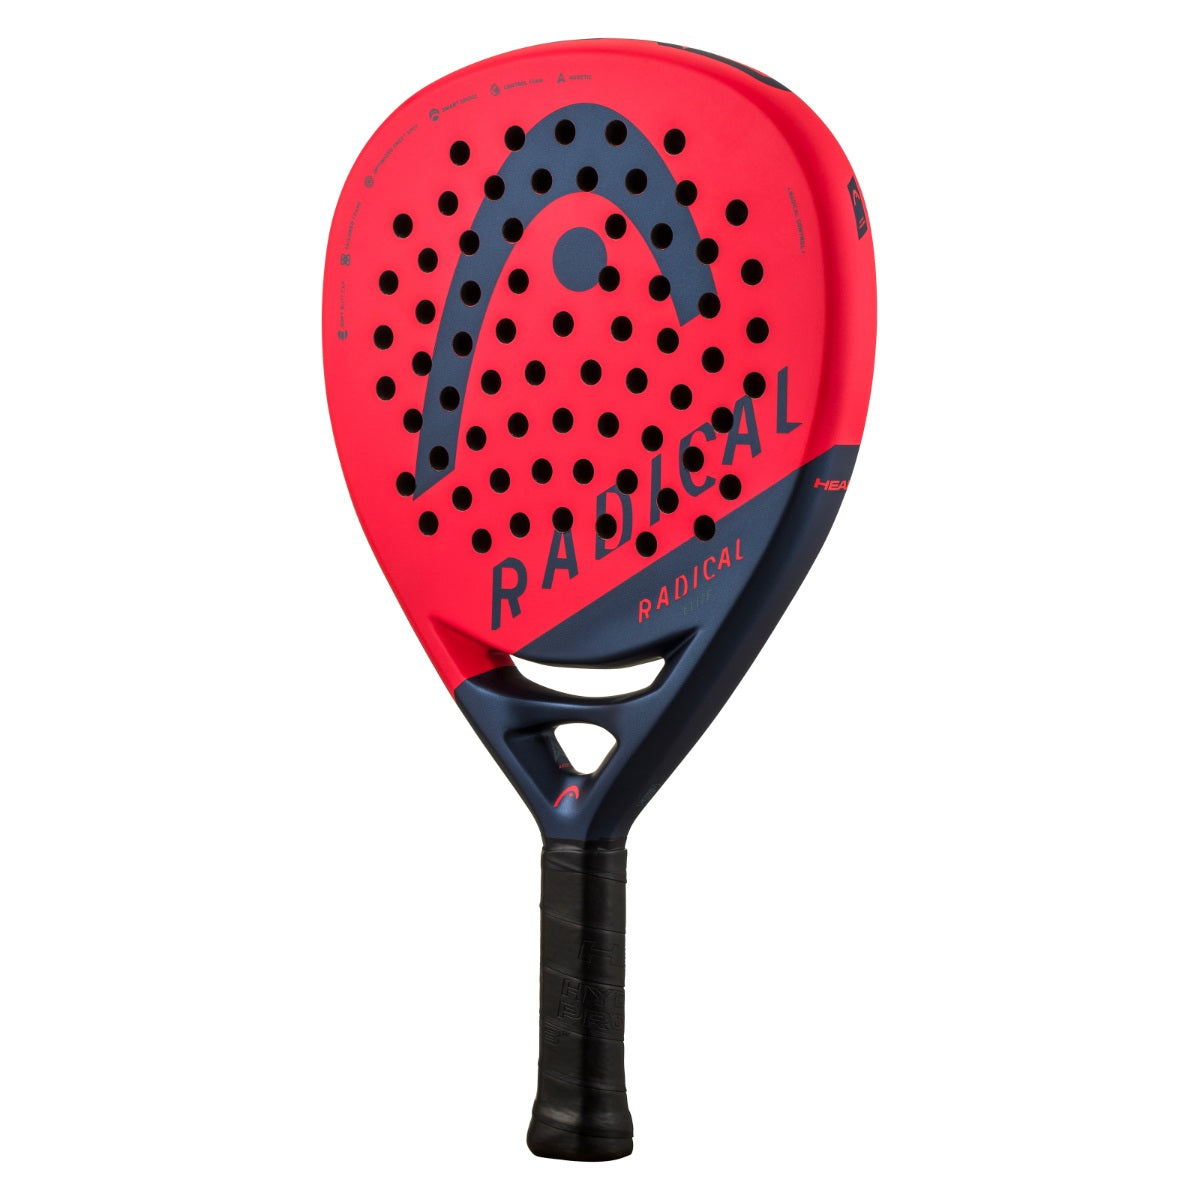 Main image of Head Radical Elite Paddle Tennis racket available at thepadelshop.co.nz